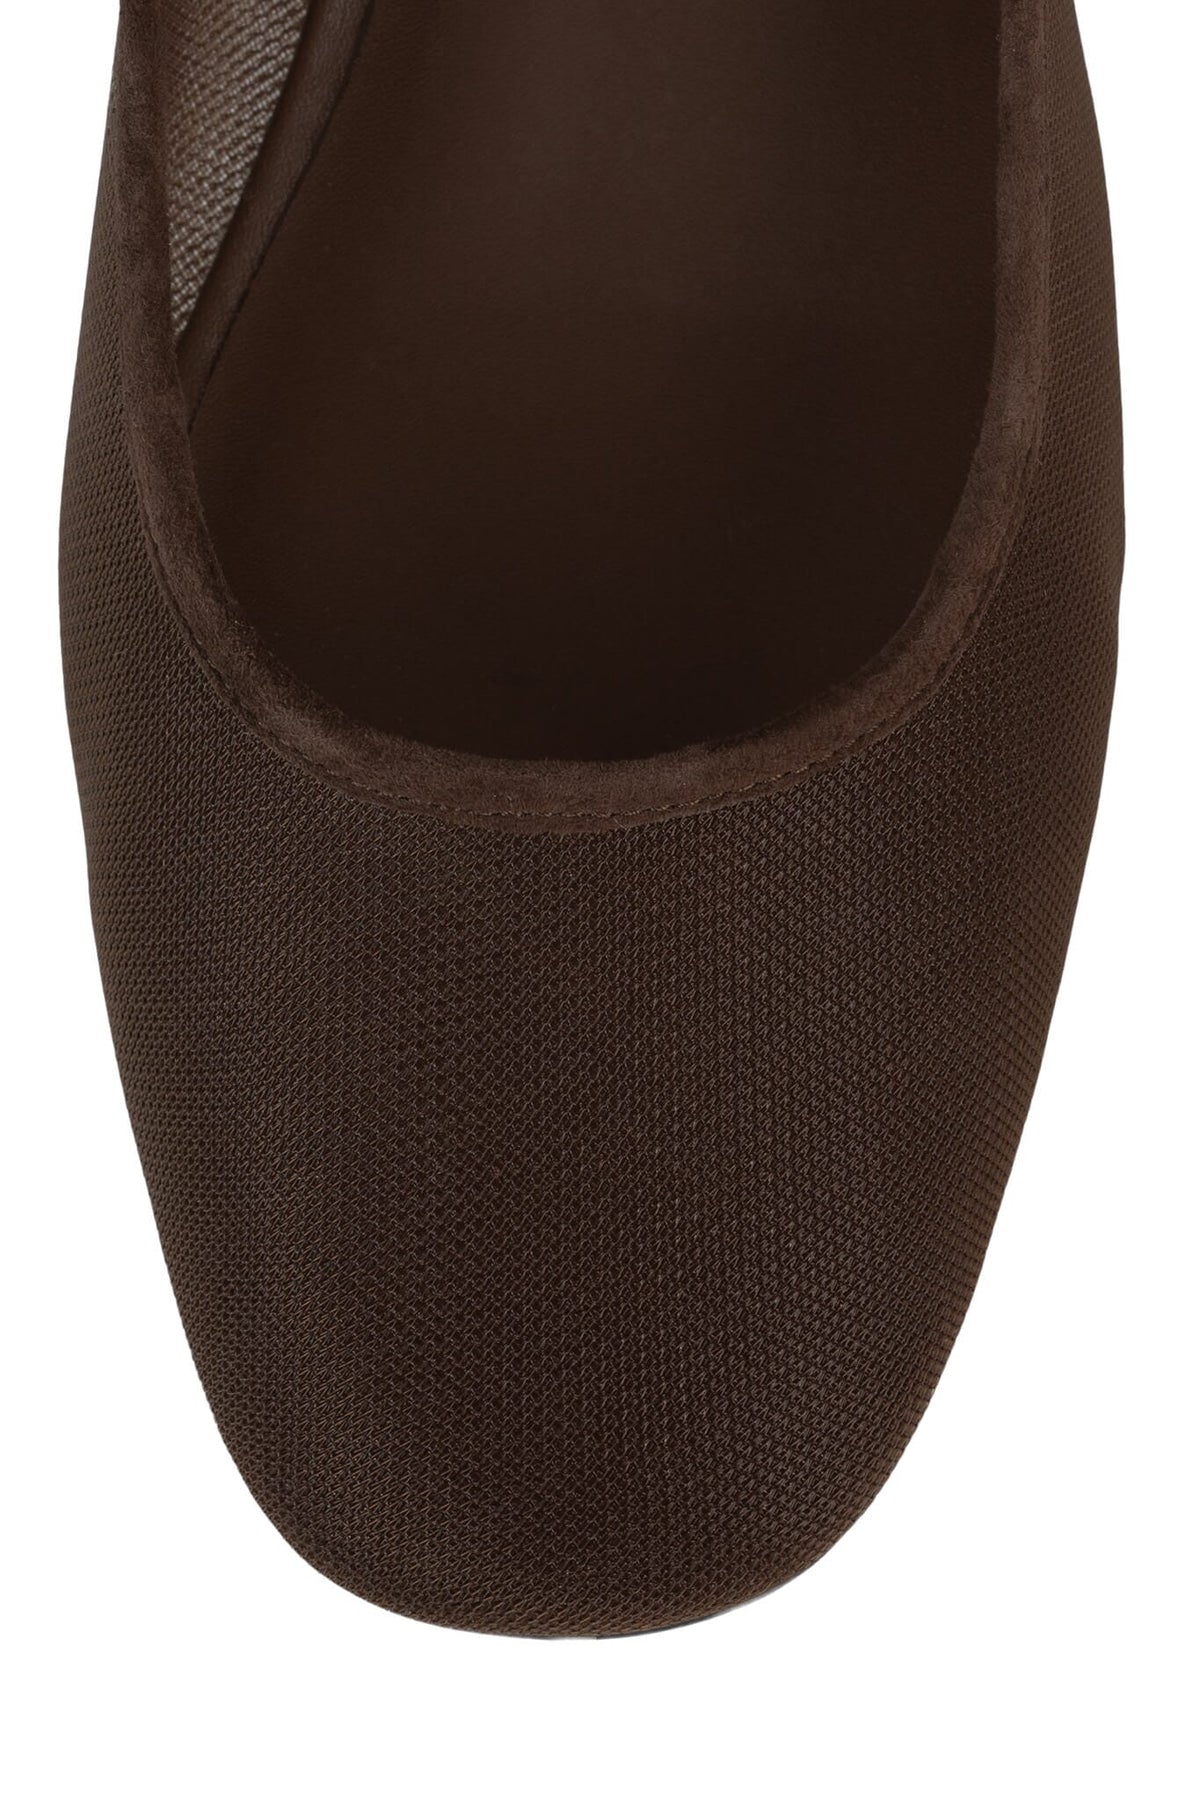 TOP-TIER Jeffrey Campbell Mary-Janes Brown Mesh Brown Suede